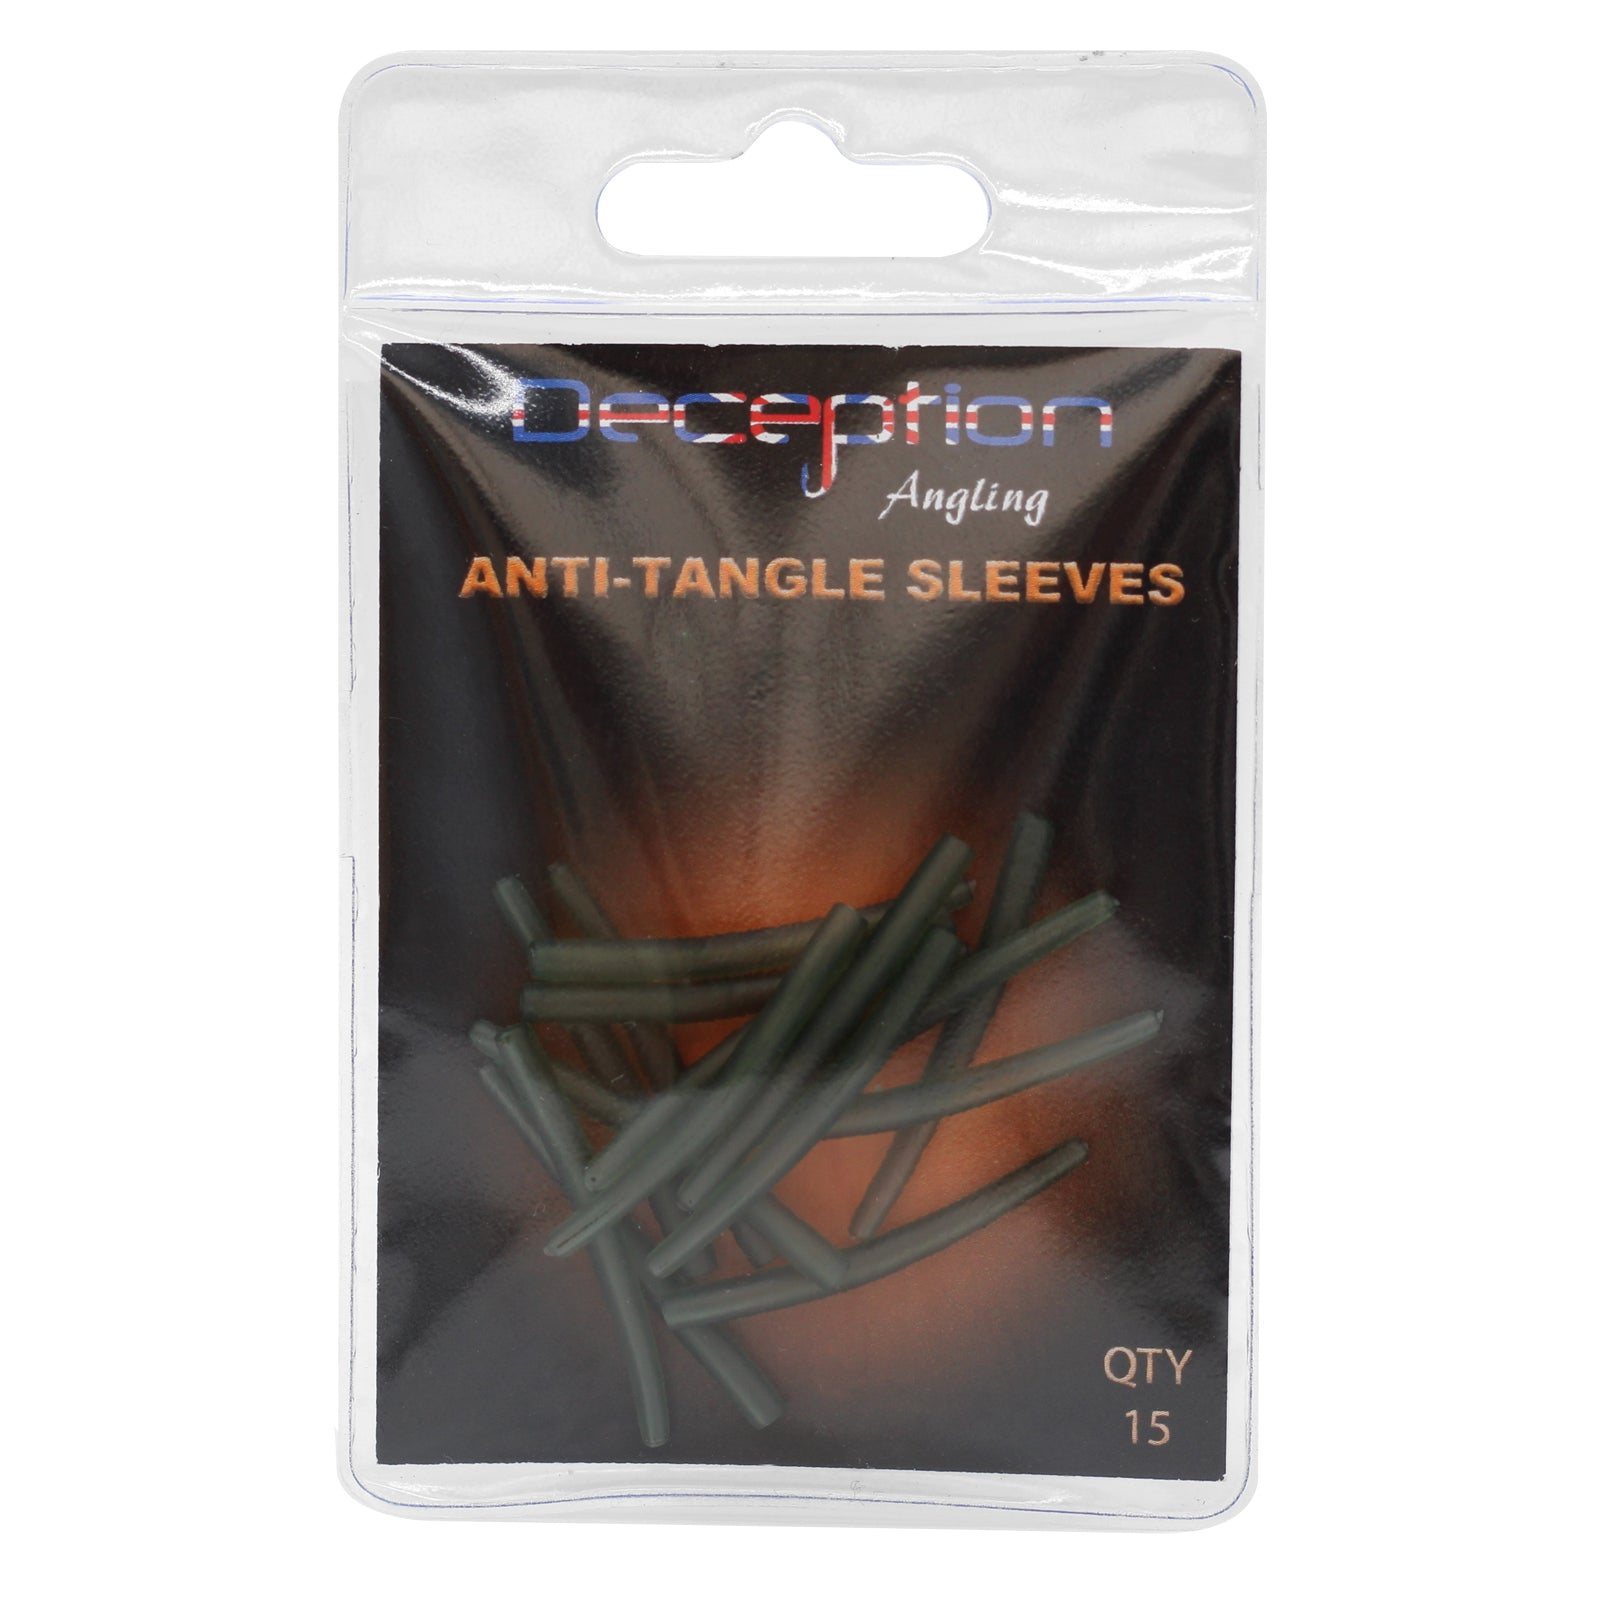 Deception Angling Anti-Tangle Sleeves for Fishing Pack of 15